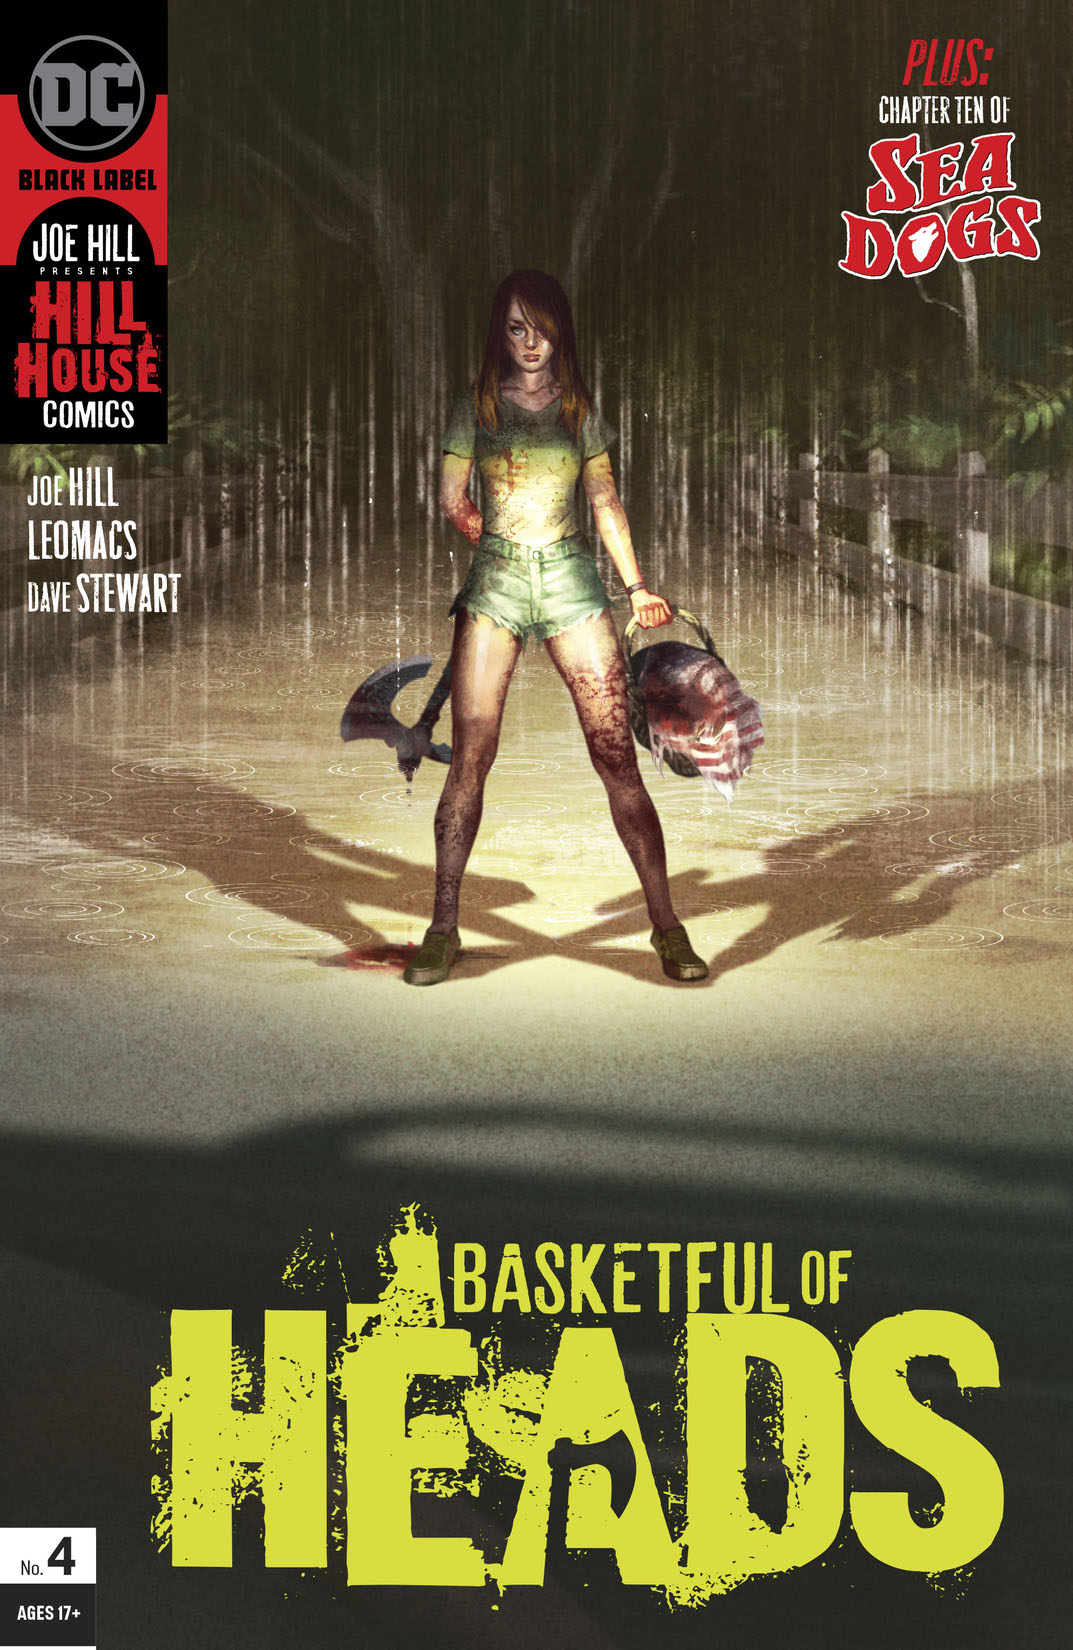 Basketful of Heads #4 preview images